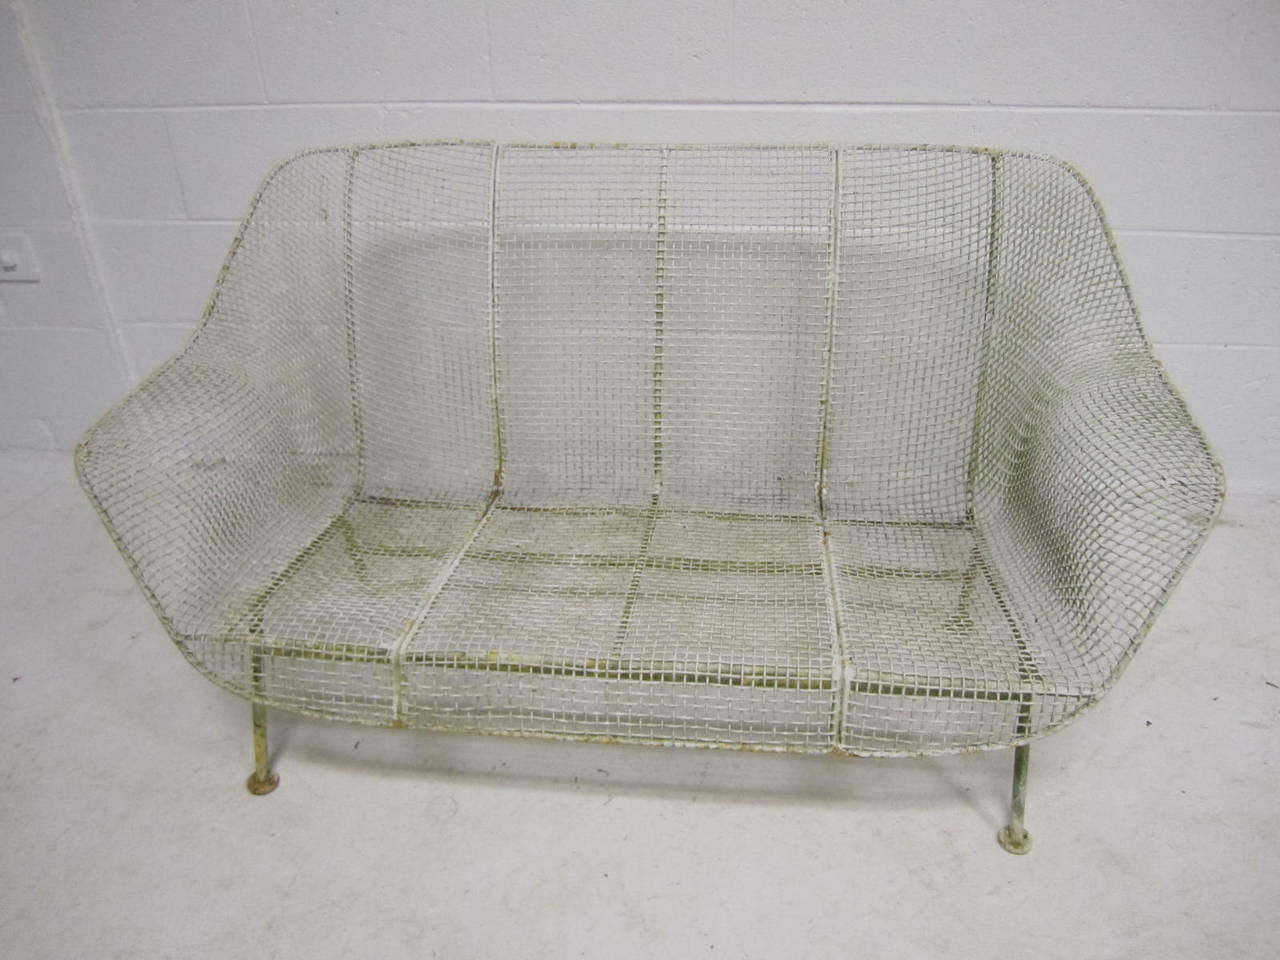 A vintage 1950's wrought iron and steel mesh settee from Russell Woodard's classic and iconic Sculptura series. Beautiful and classic sculptural design. This piece retains it's original finish which does show some age-we like the vintage look but we